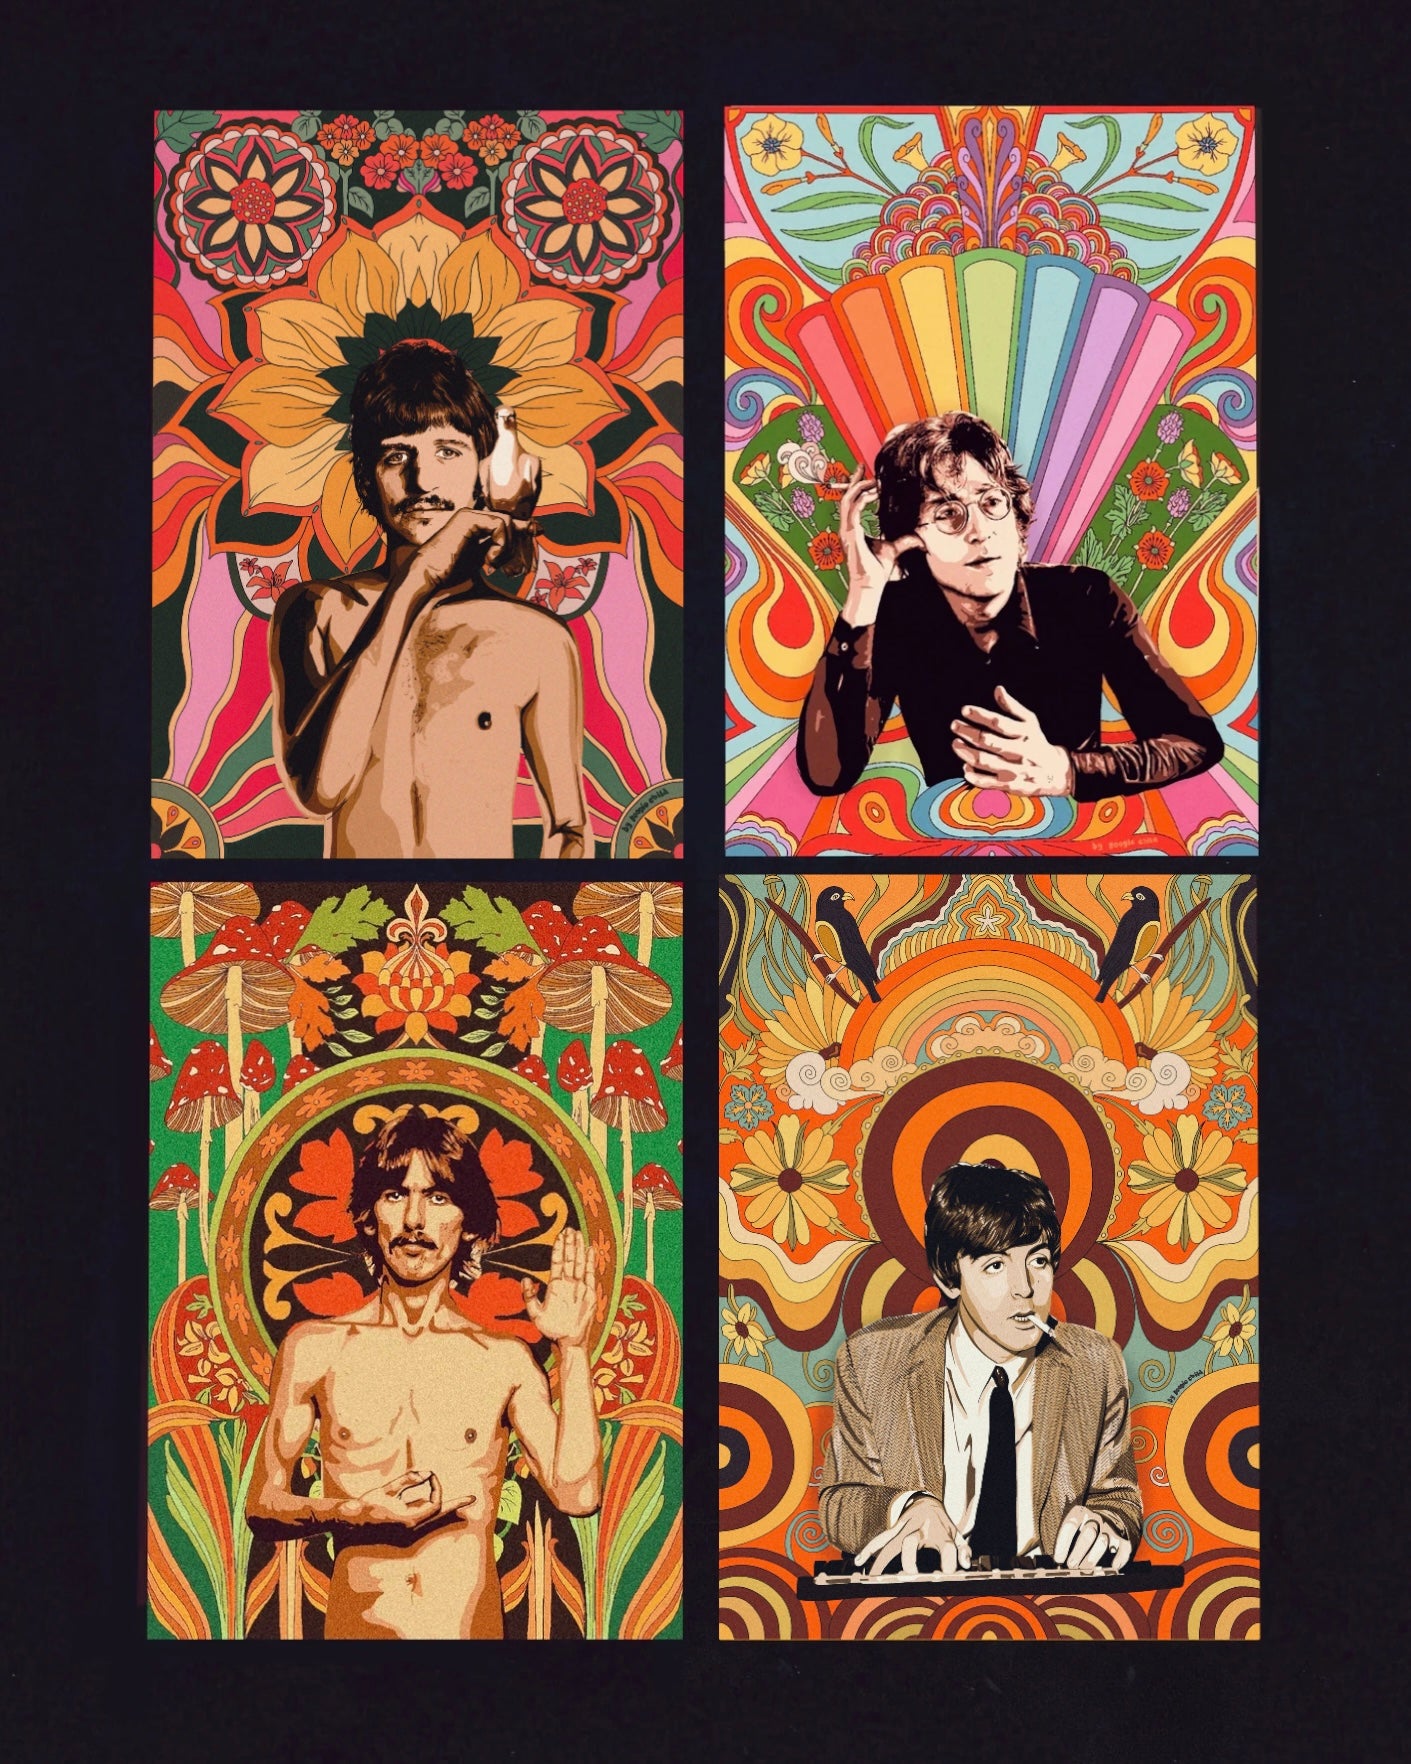 The Ringo Starr Print - Size A3 / 11.7" × 16.5"